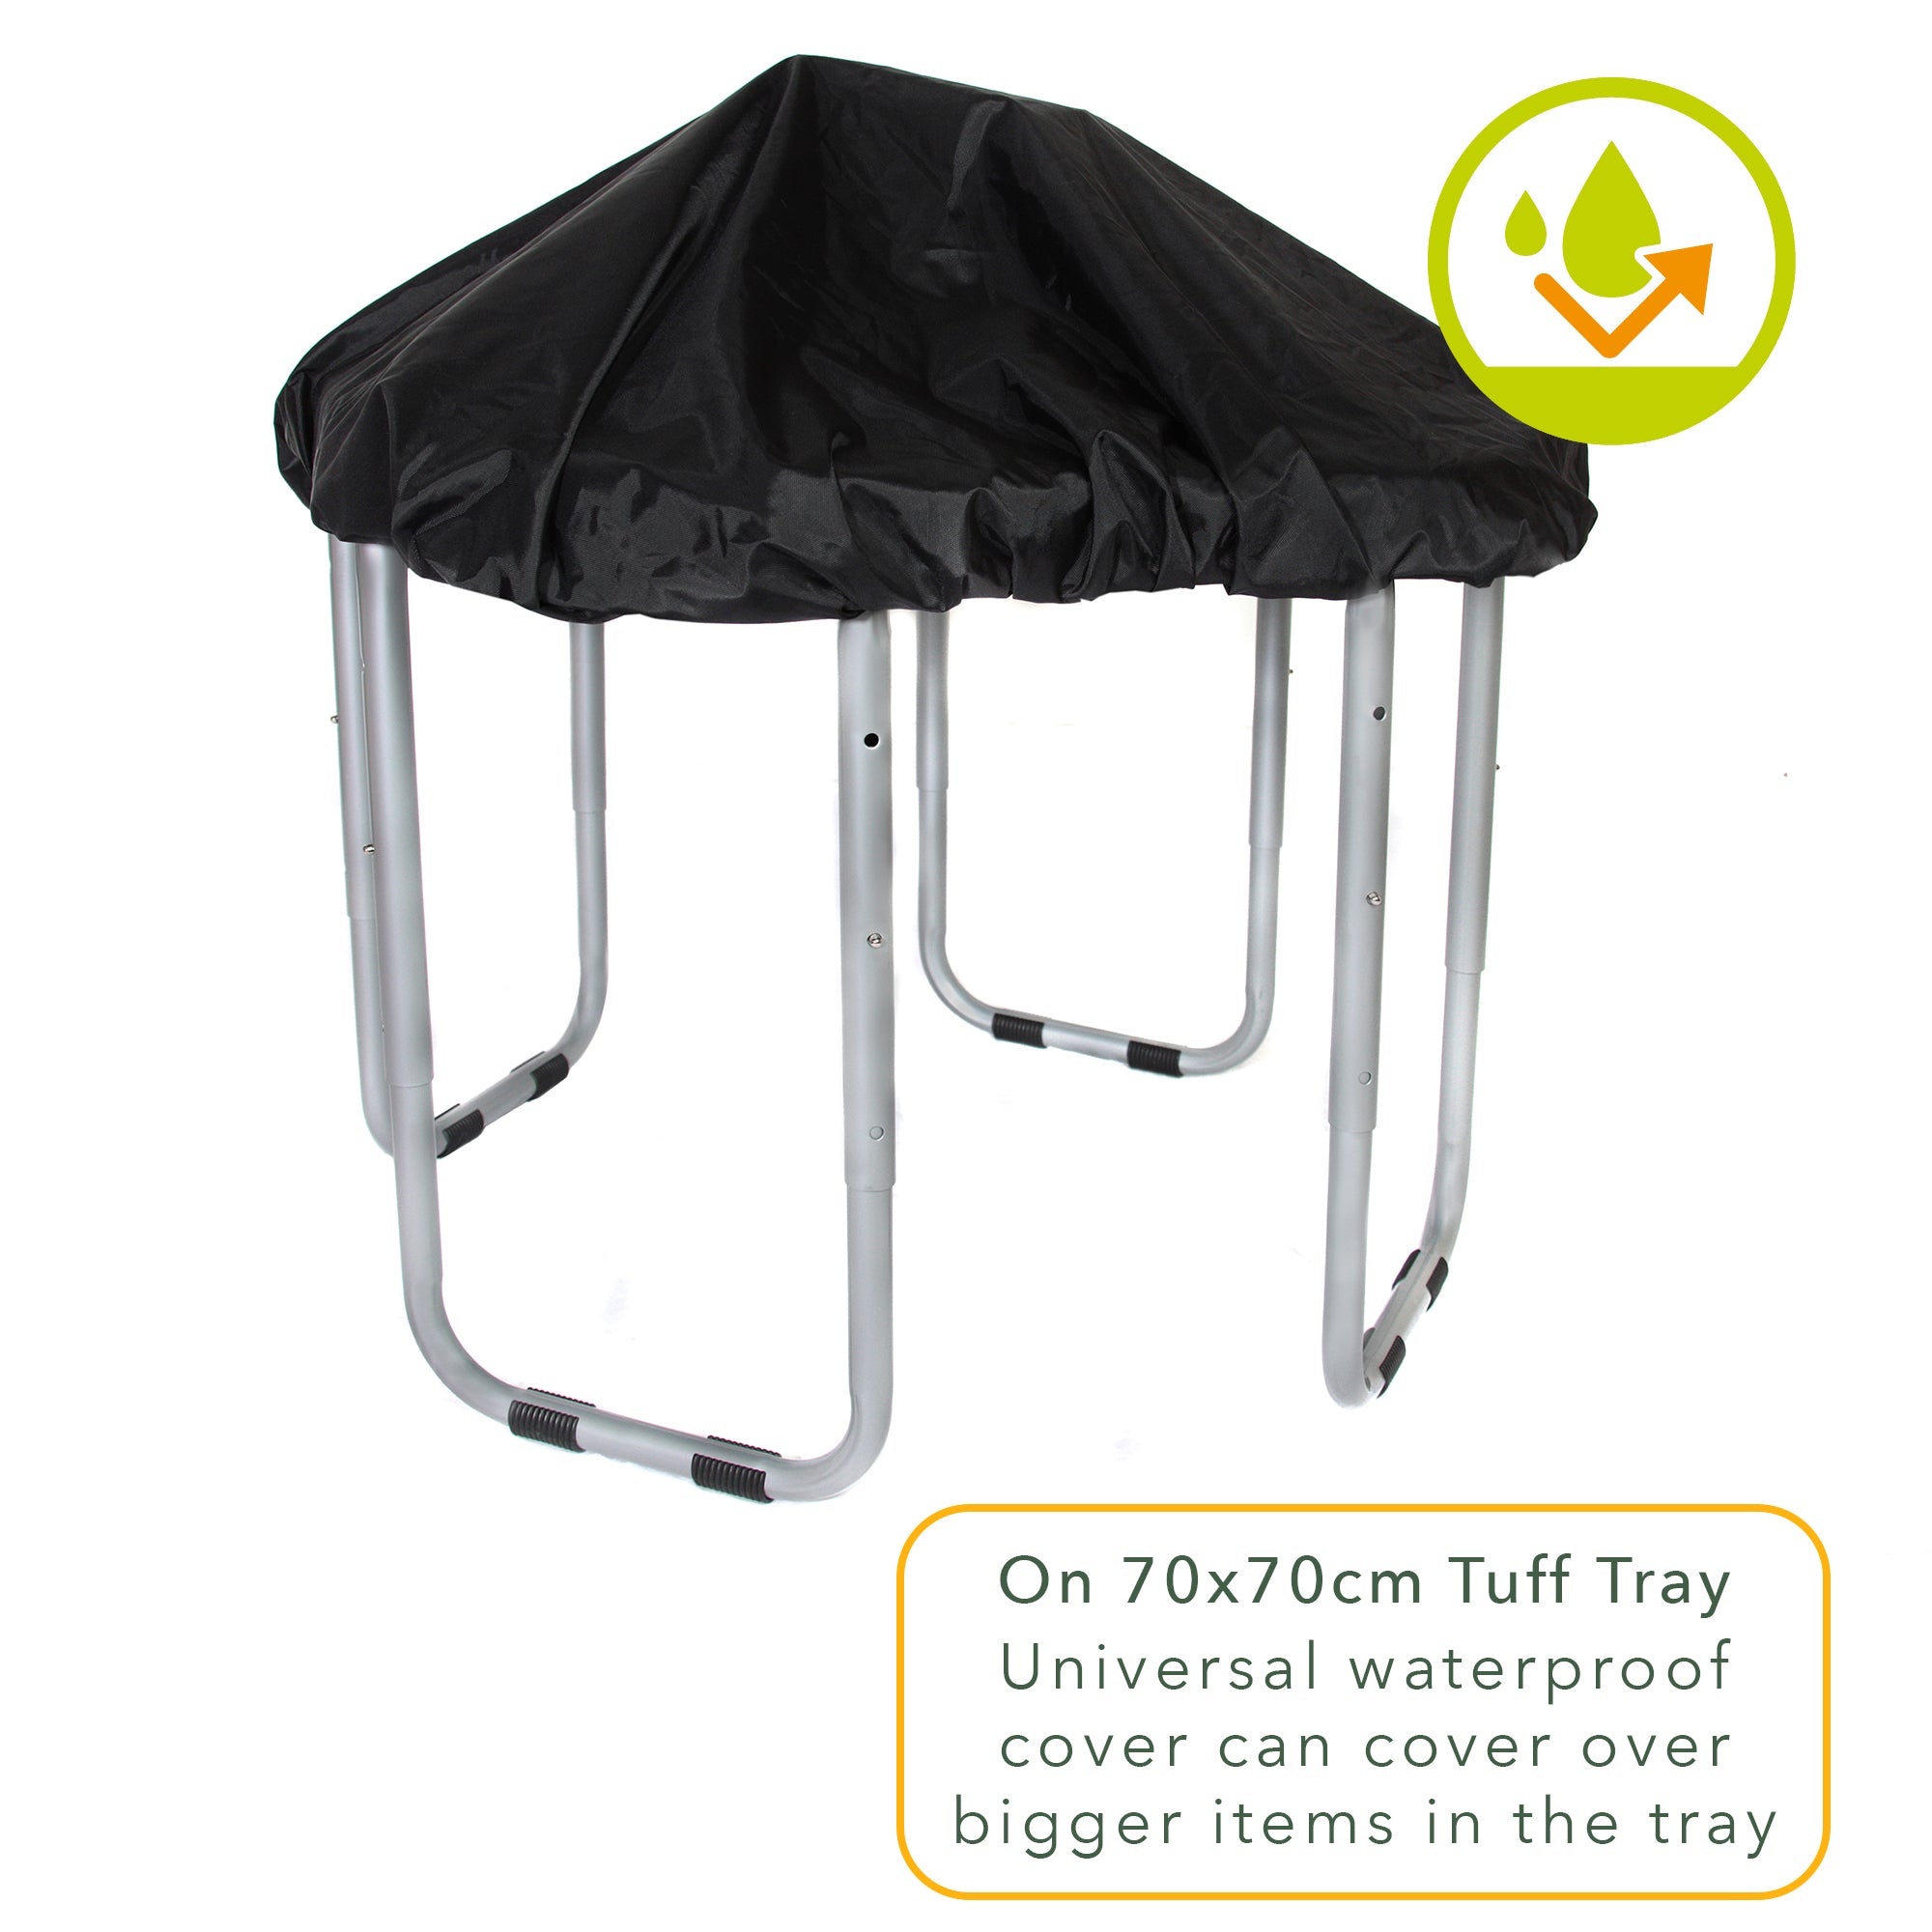 BUNDLE PACK - Original Tuff Tray, Stand, and Universal Waterproof Cover Pack - 3 Colour Options